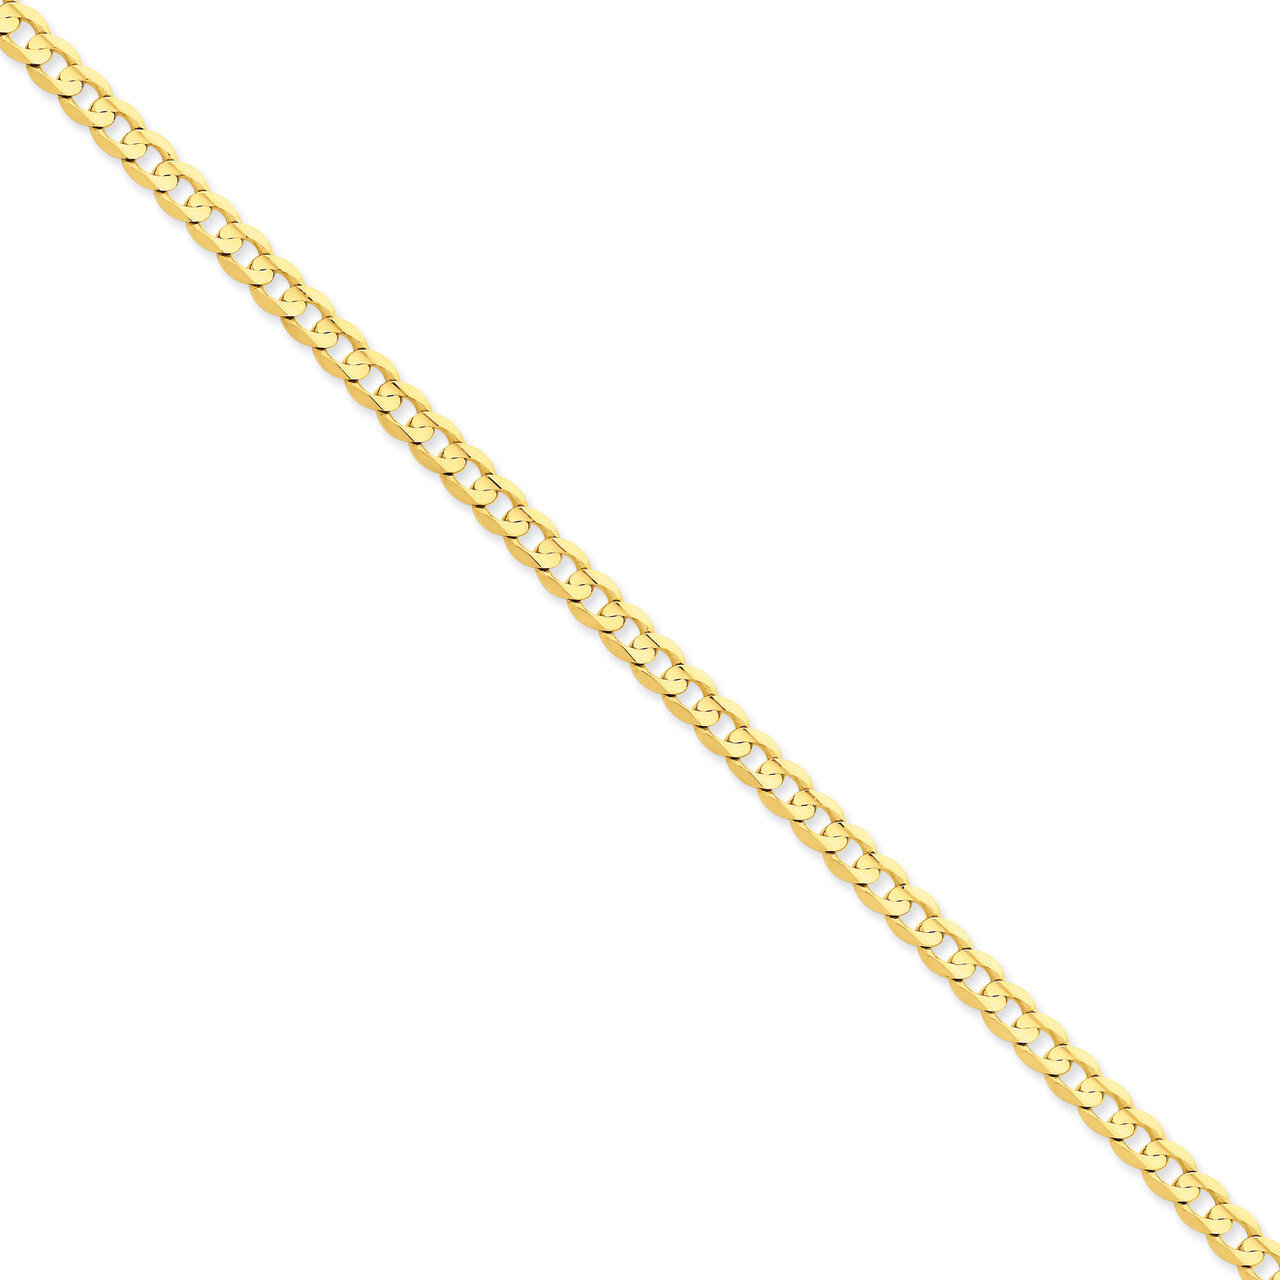 5.25mm Open Concave Curb Chain 20 Inch 14k Gold LCR140-20